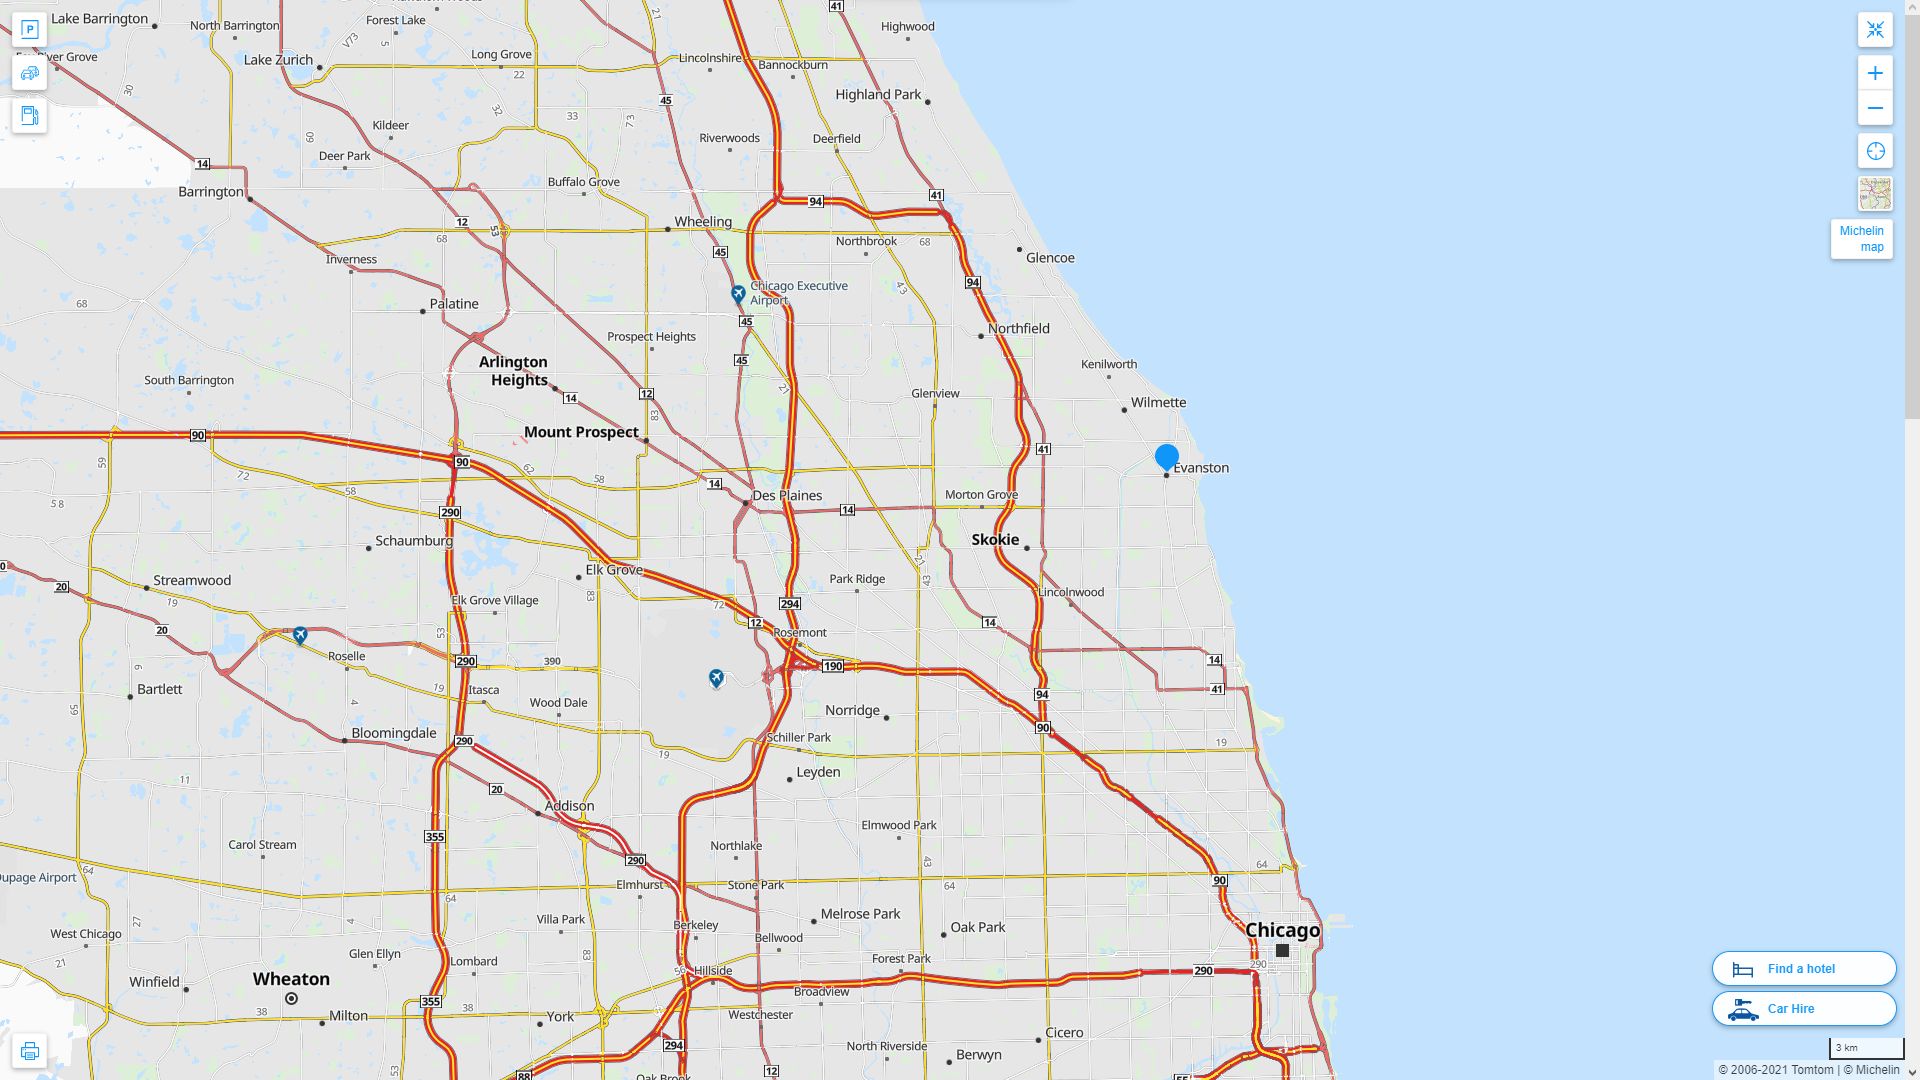 Evanston illinois Highway and Road Map